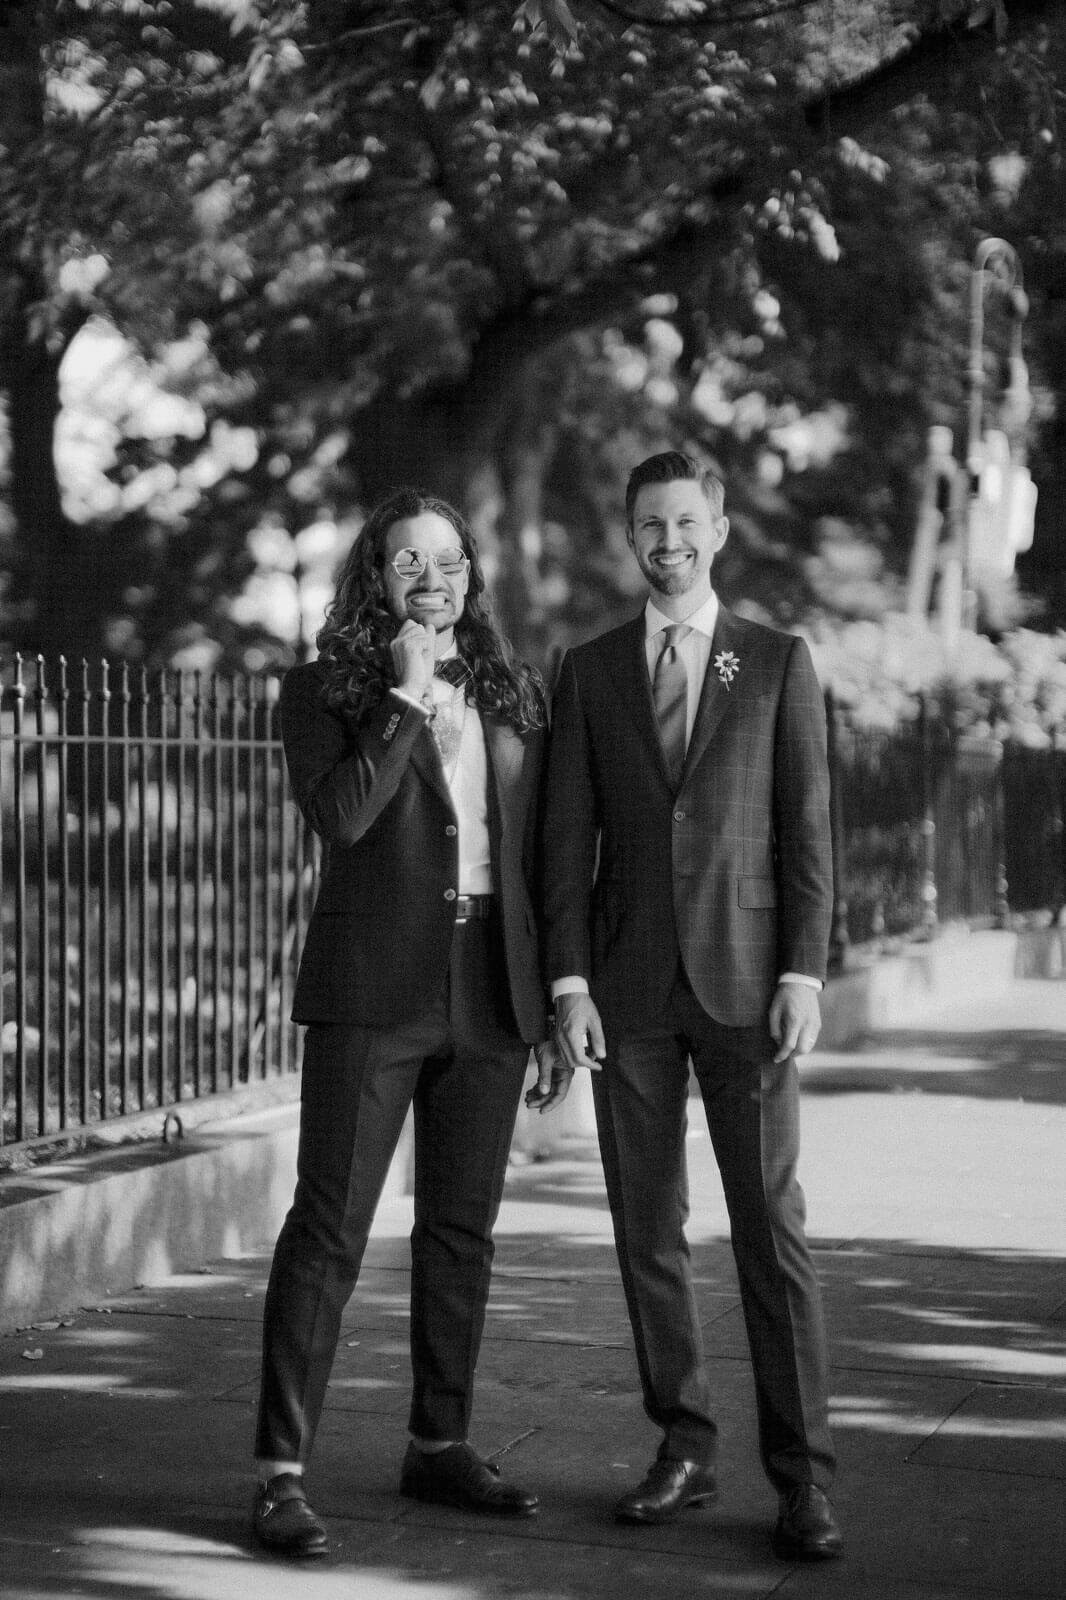 Black and white photo of the two grooms in a park, with trees in the background. NYC City Hall Elopement Image by Jenny Fu Studio